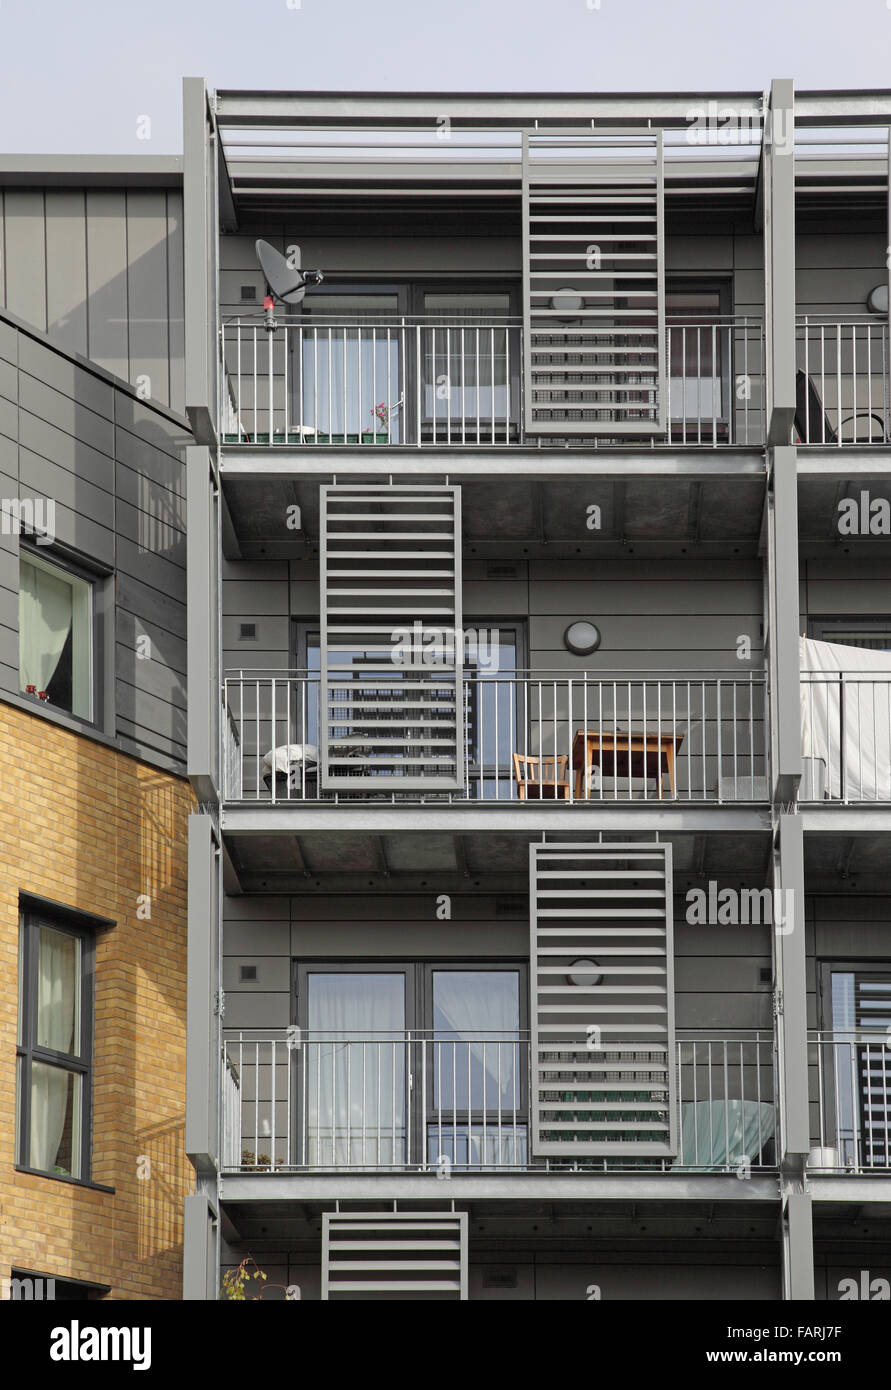 Steel balconies on a 5 storey residential block in Hackney, London.Shows structural steel frame, steel louvres and zinc cladding Stock Photo